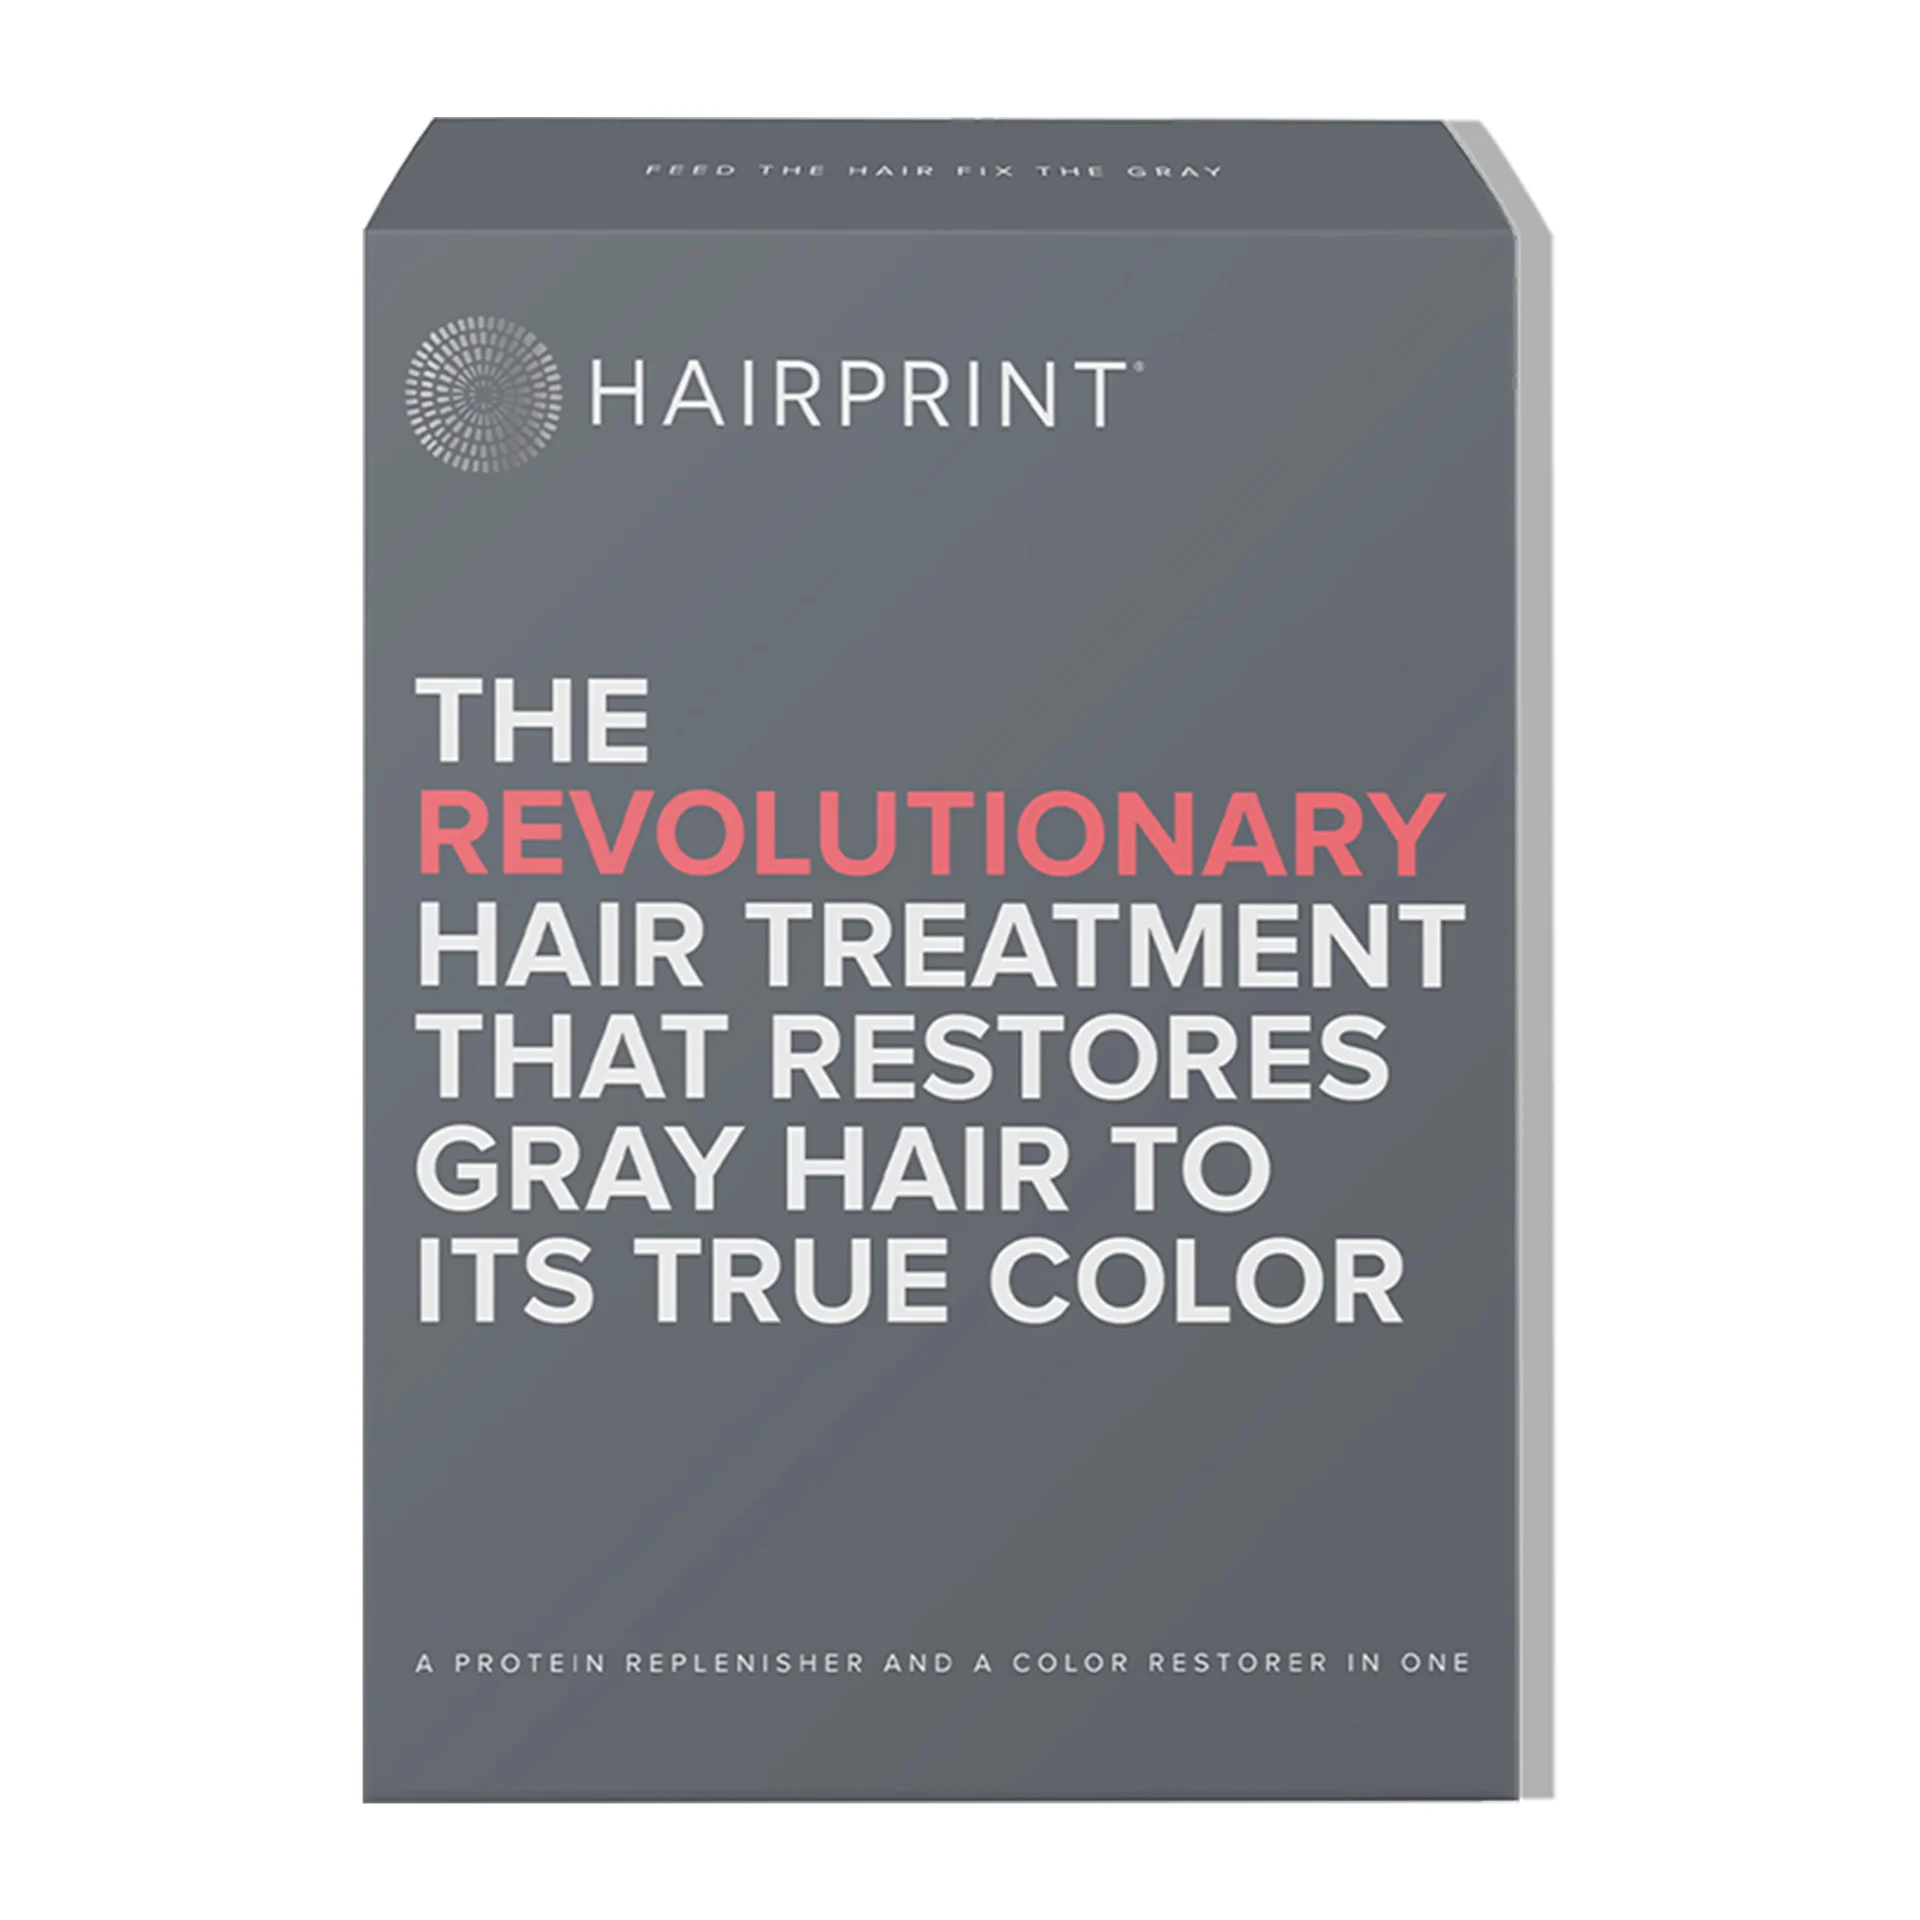 hairprint, certified organic hair color for men, hairprint promo code